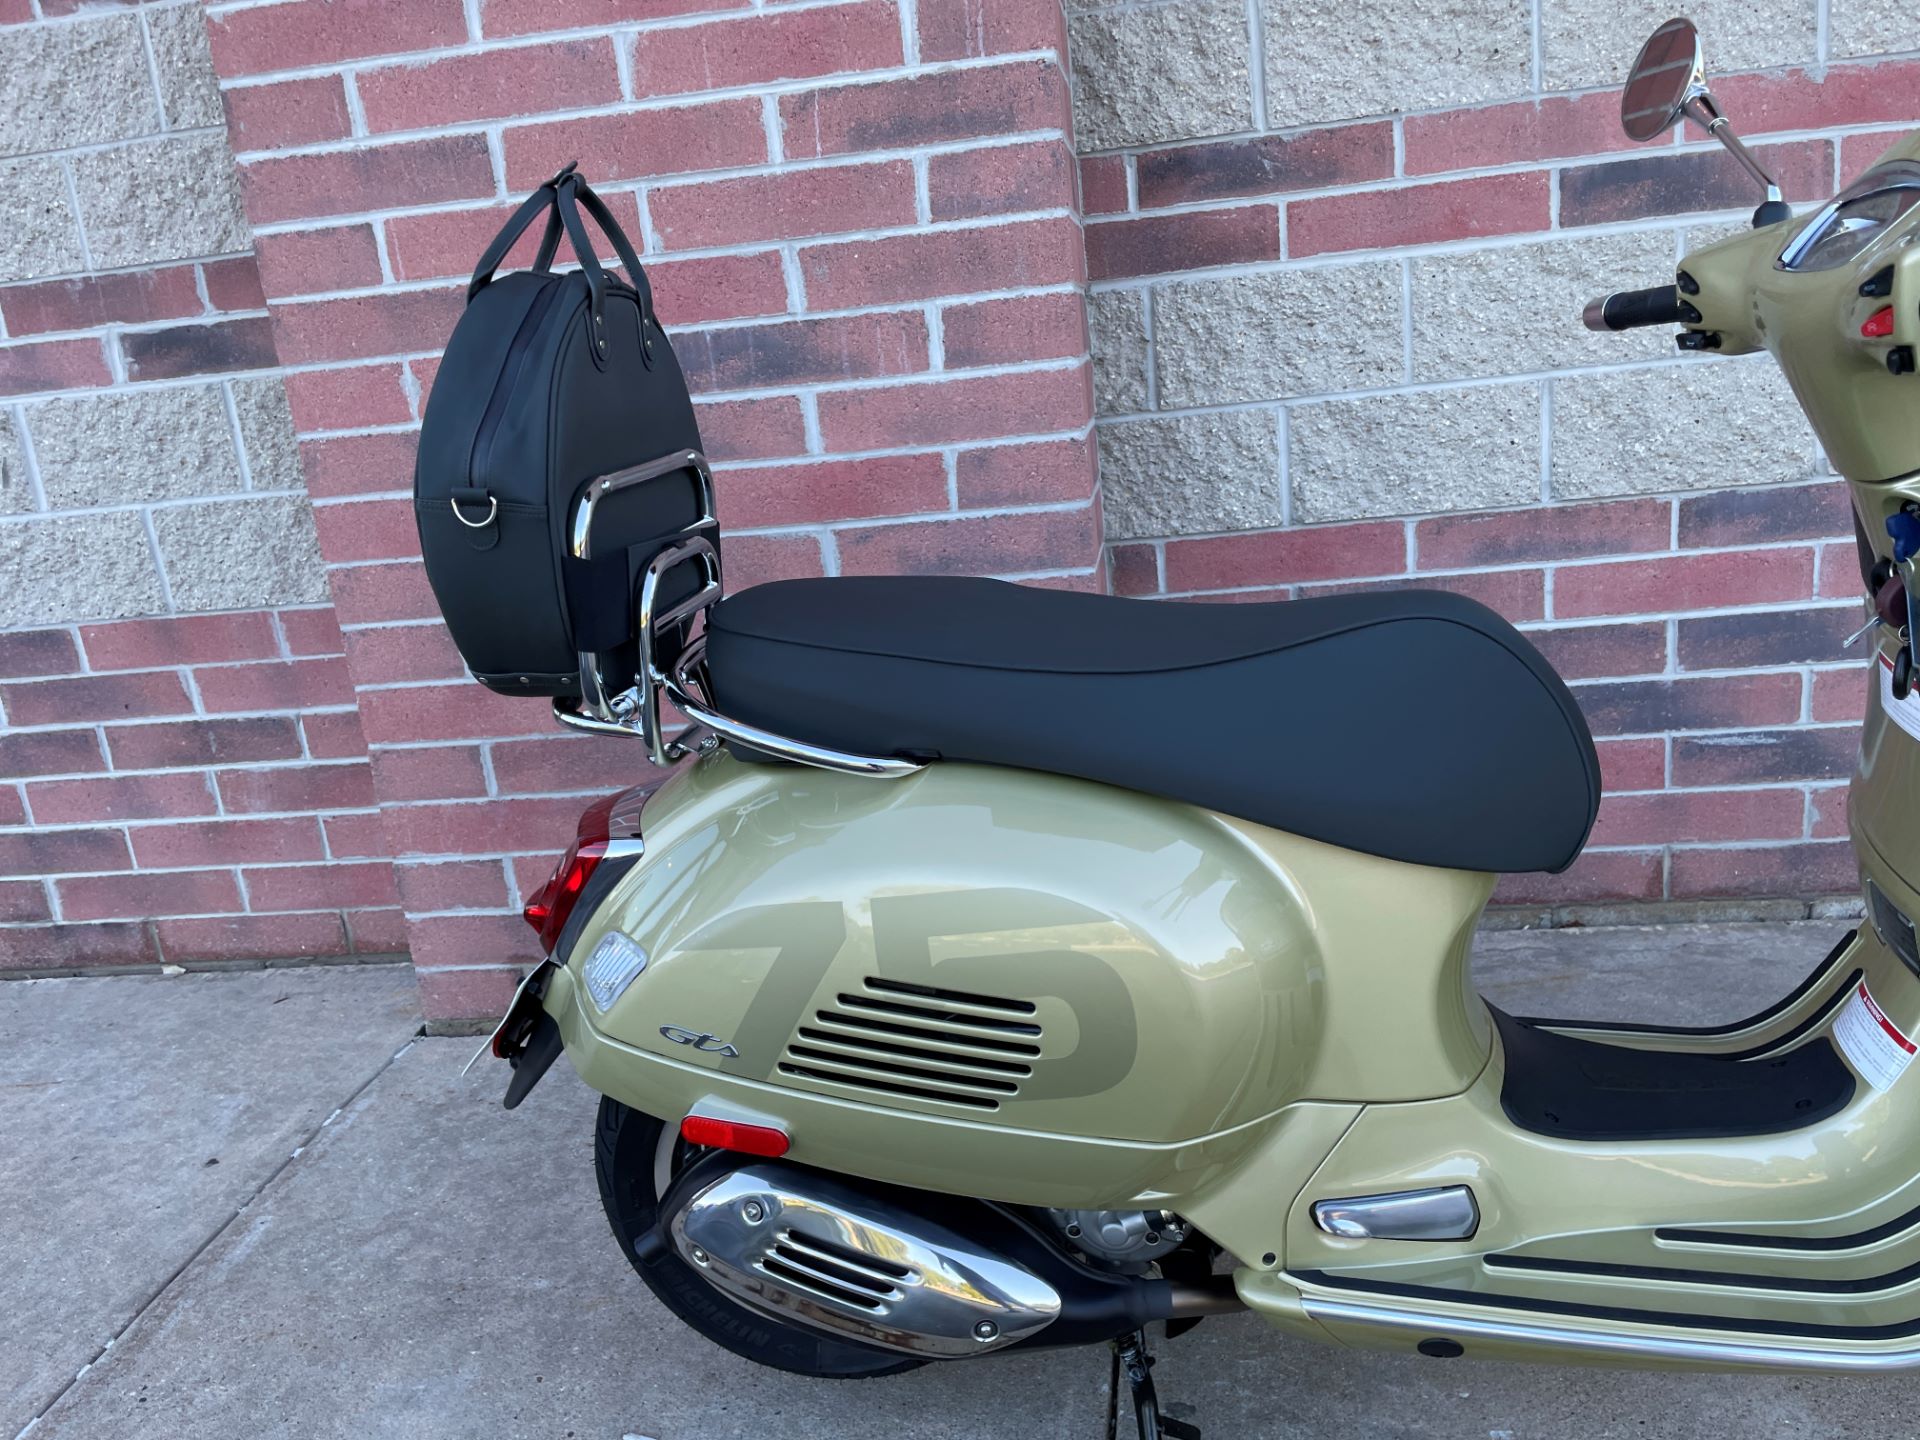 2021 Vespa GTS 300 75th in Muskego, Wisconsin - Photo 6